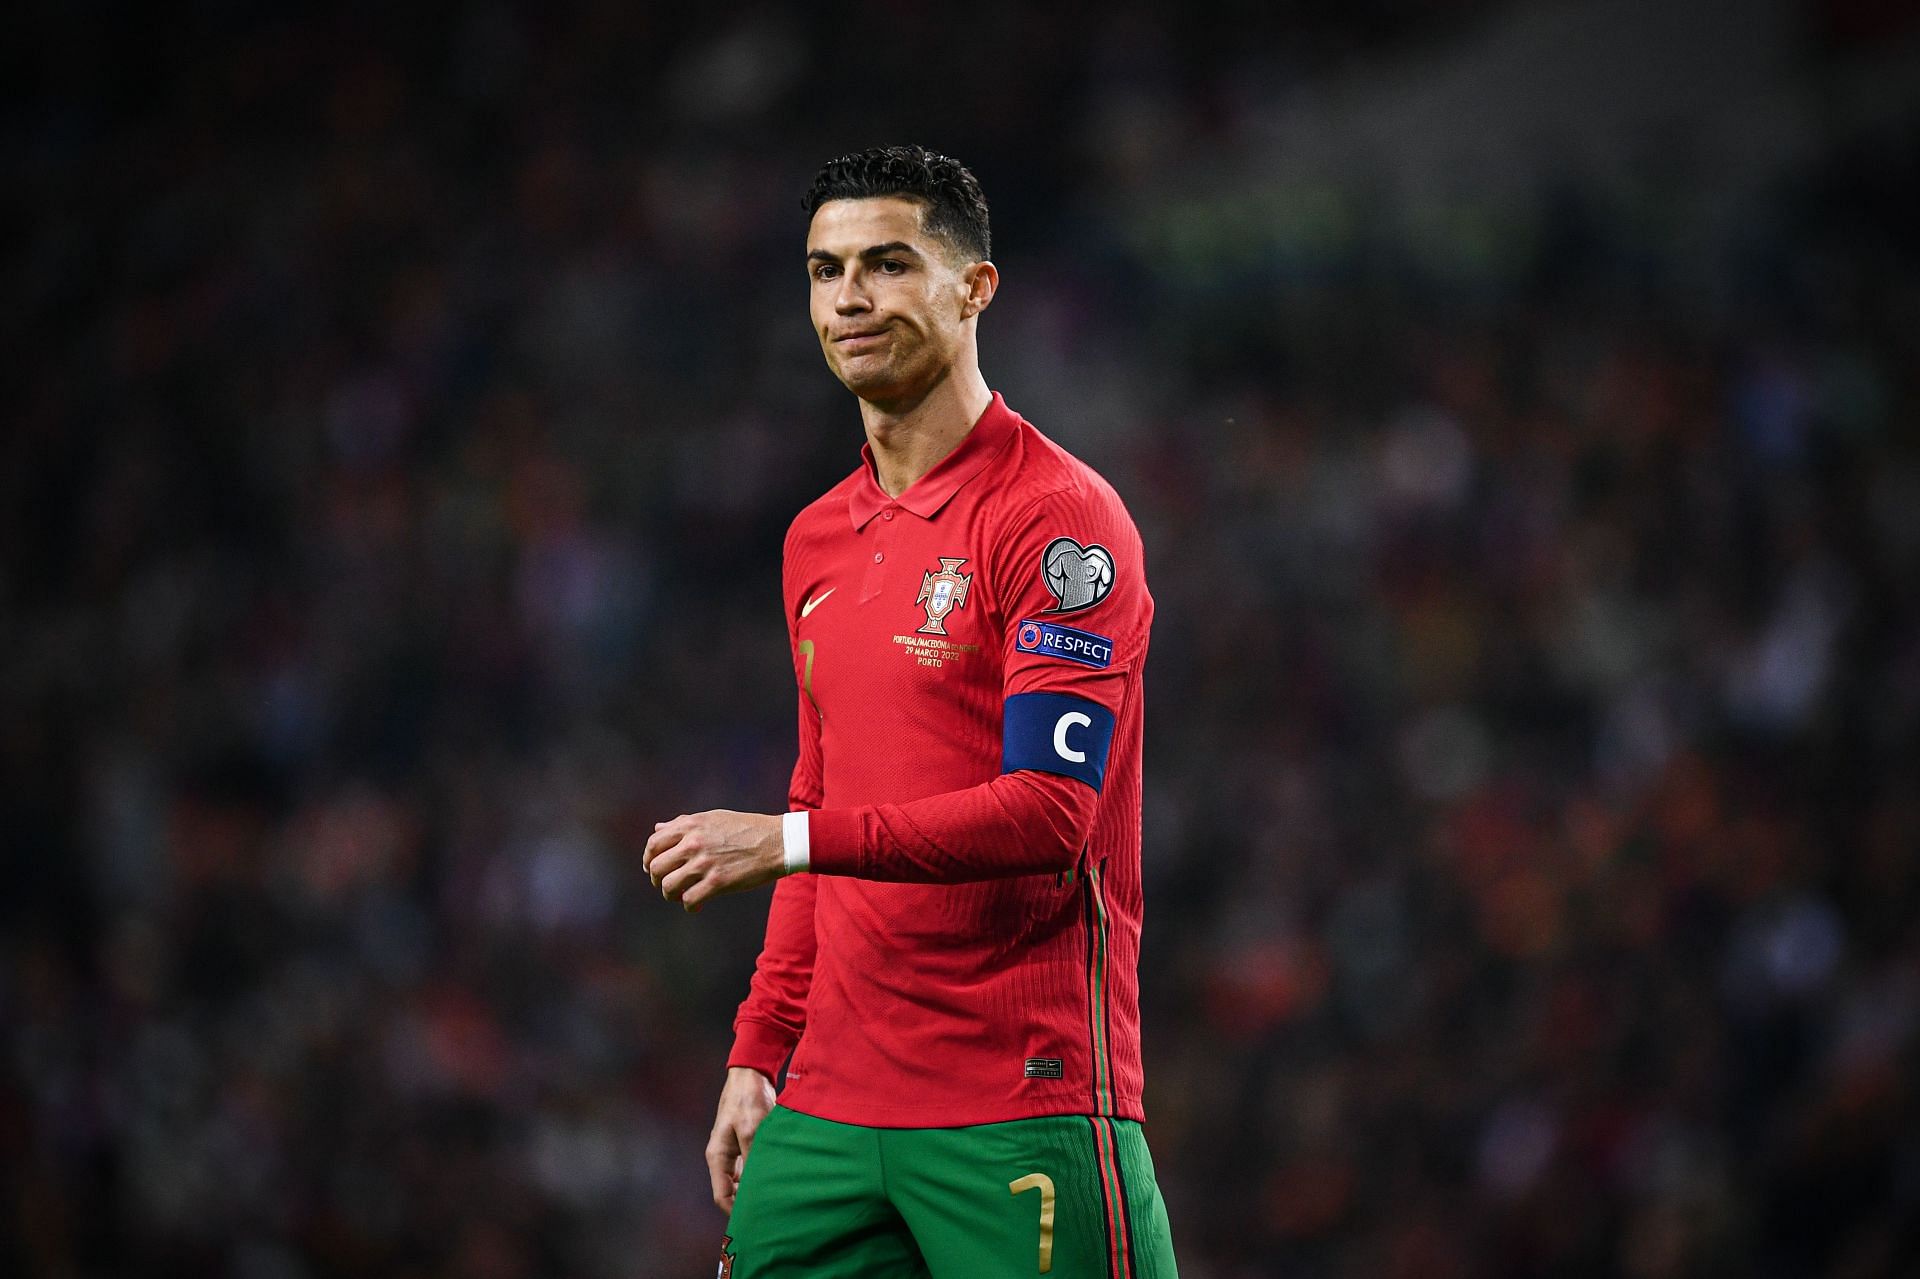 Cristiano Ronaldo&rsquo;s move to Old Trafford has not lived up to expectationst